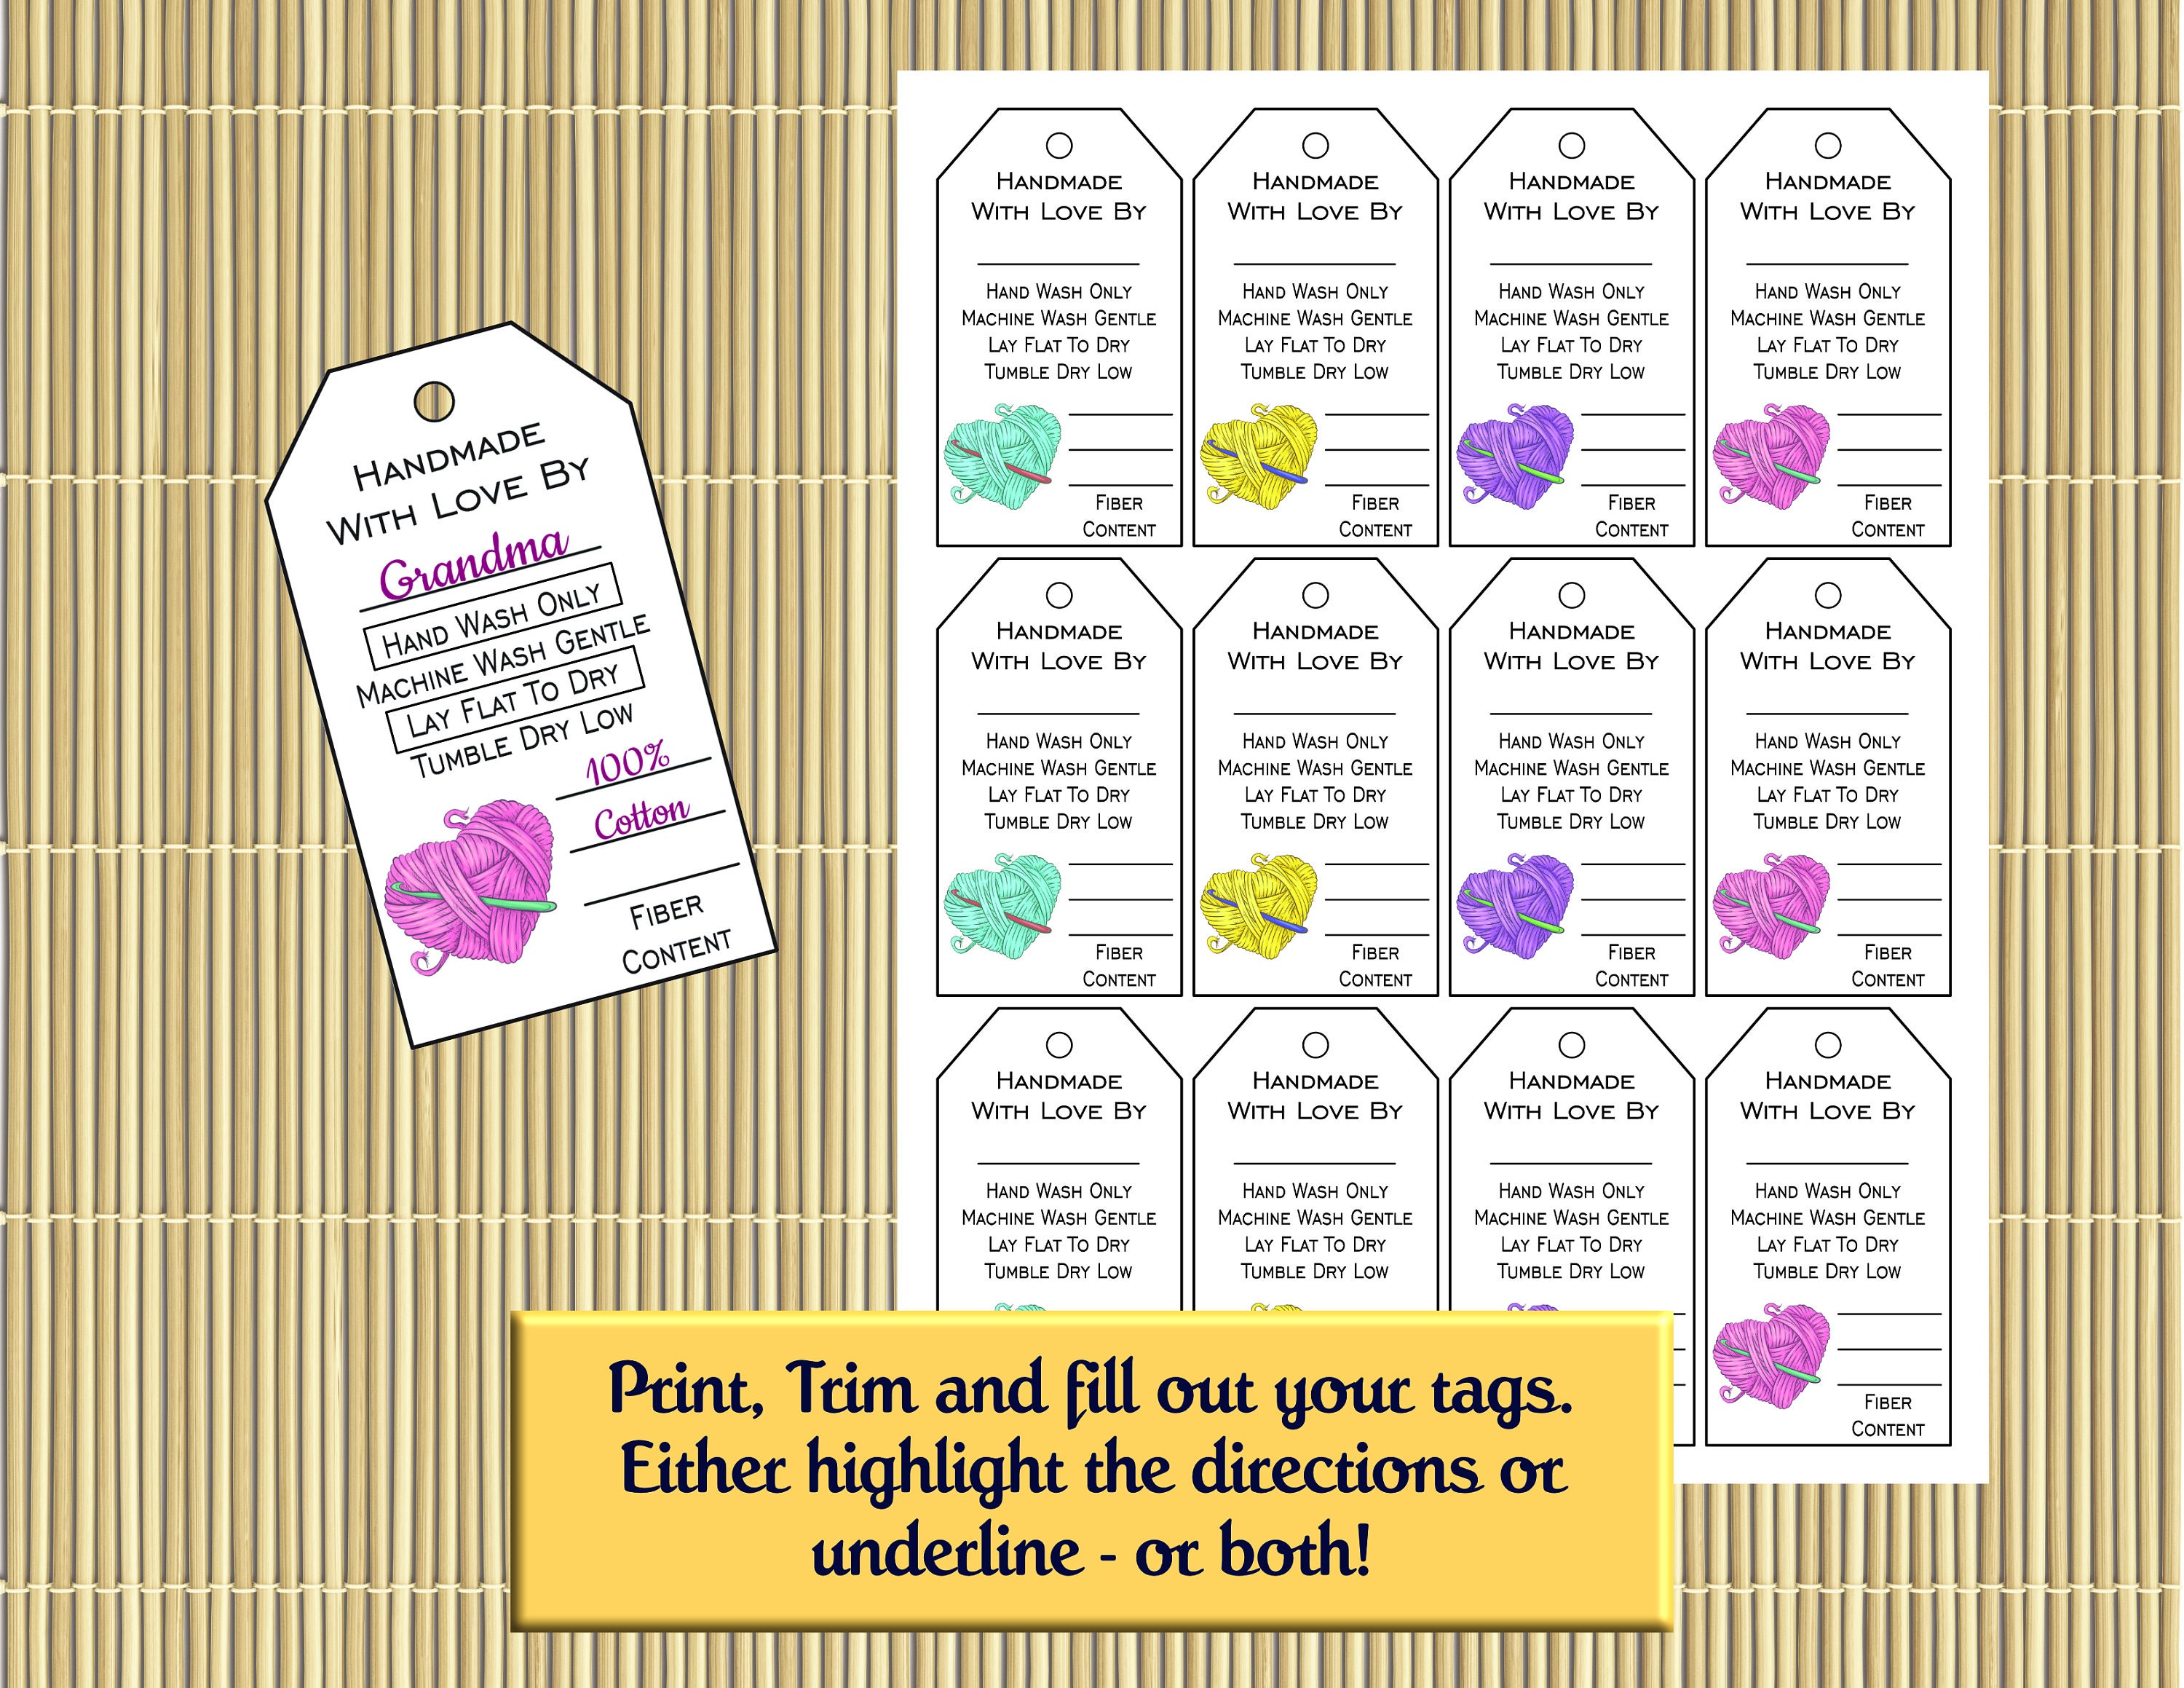 Free Handmade with Love Printable Tags – Cozy Knitting and Crochet